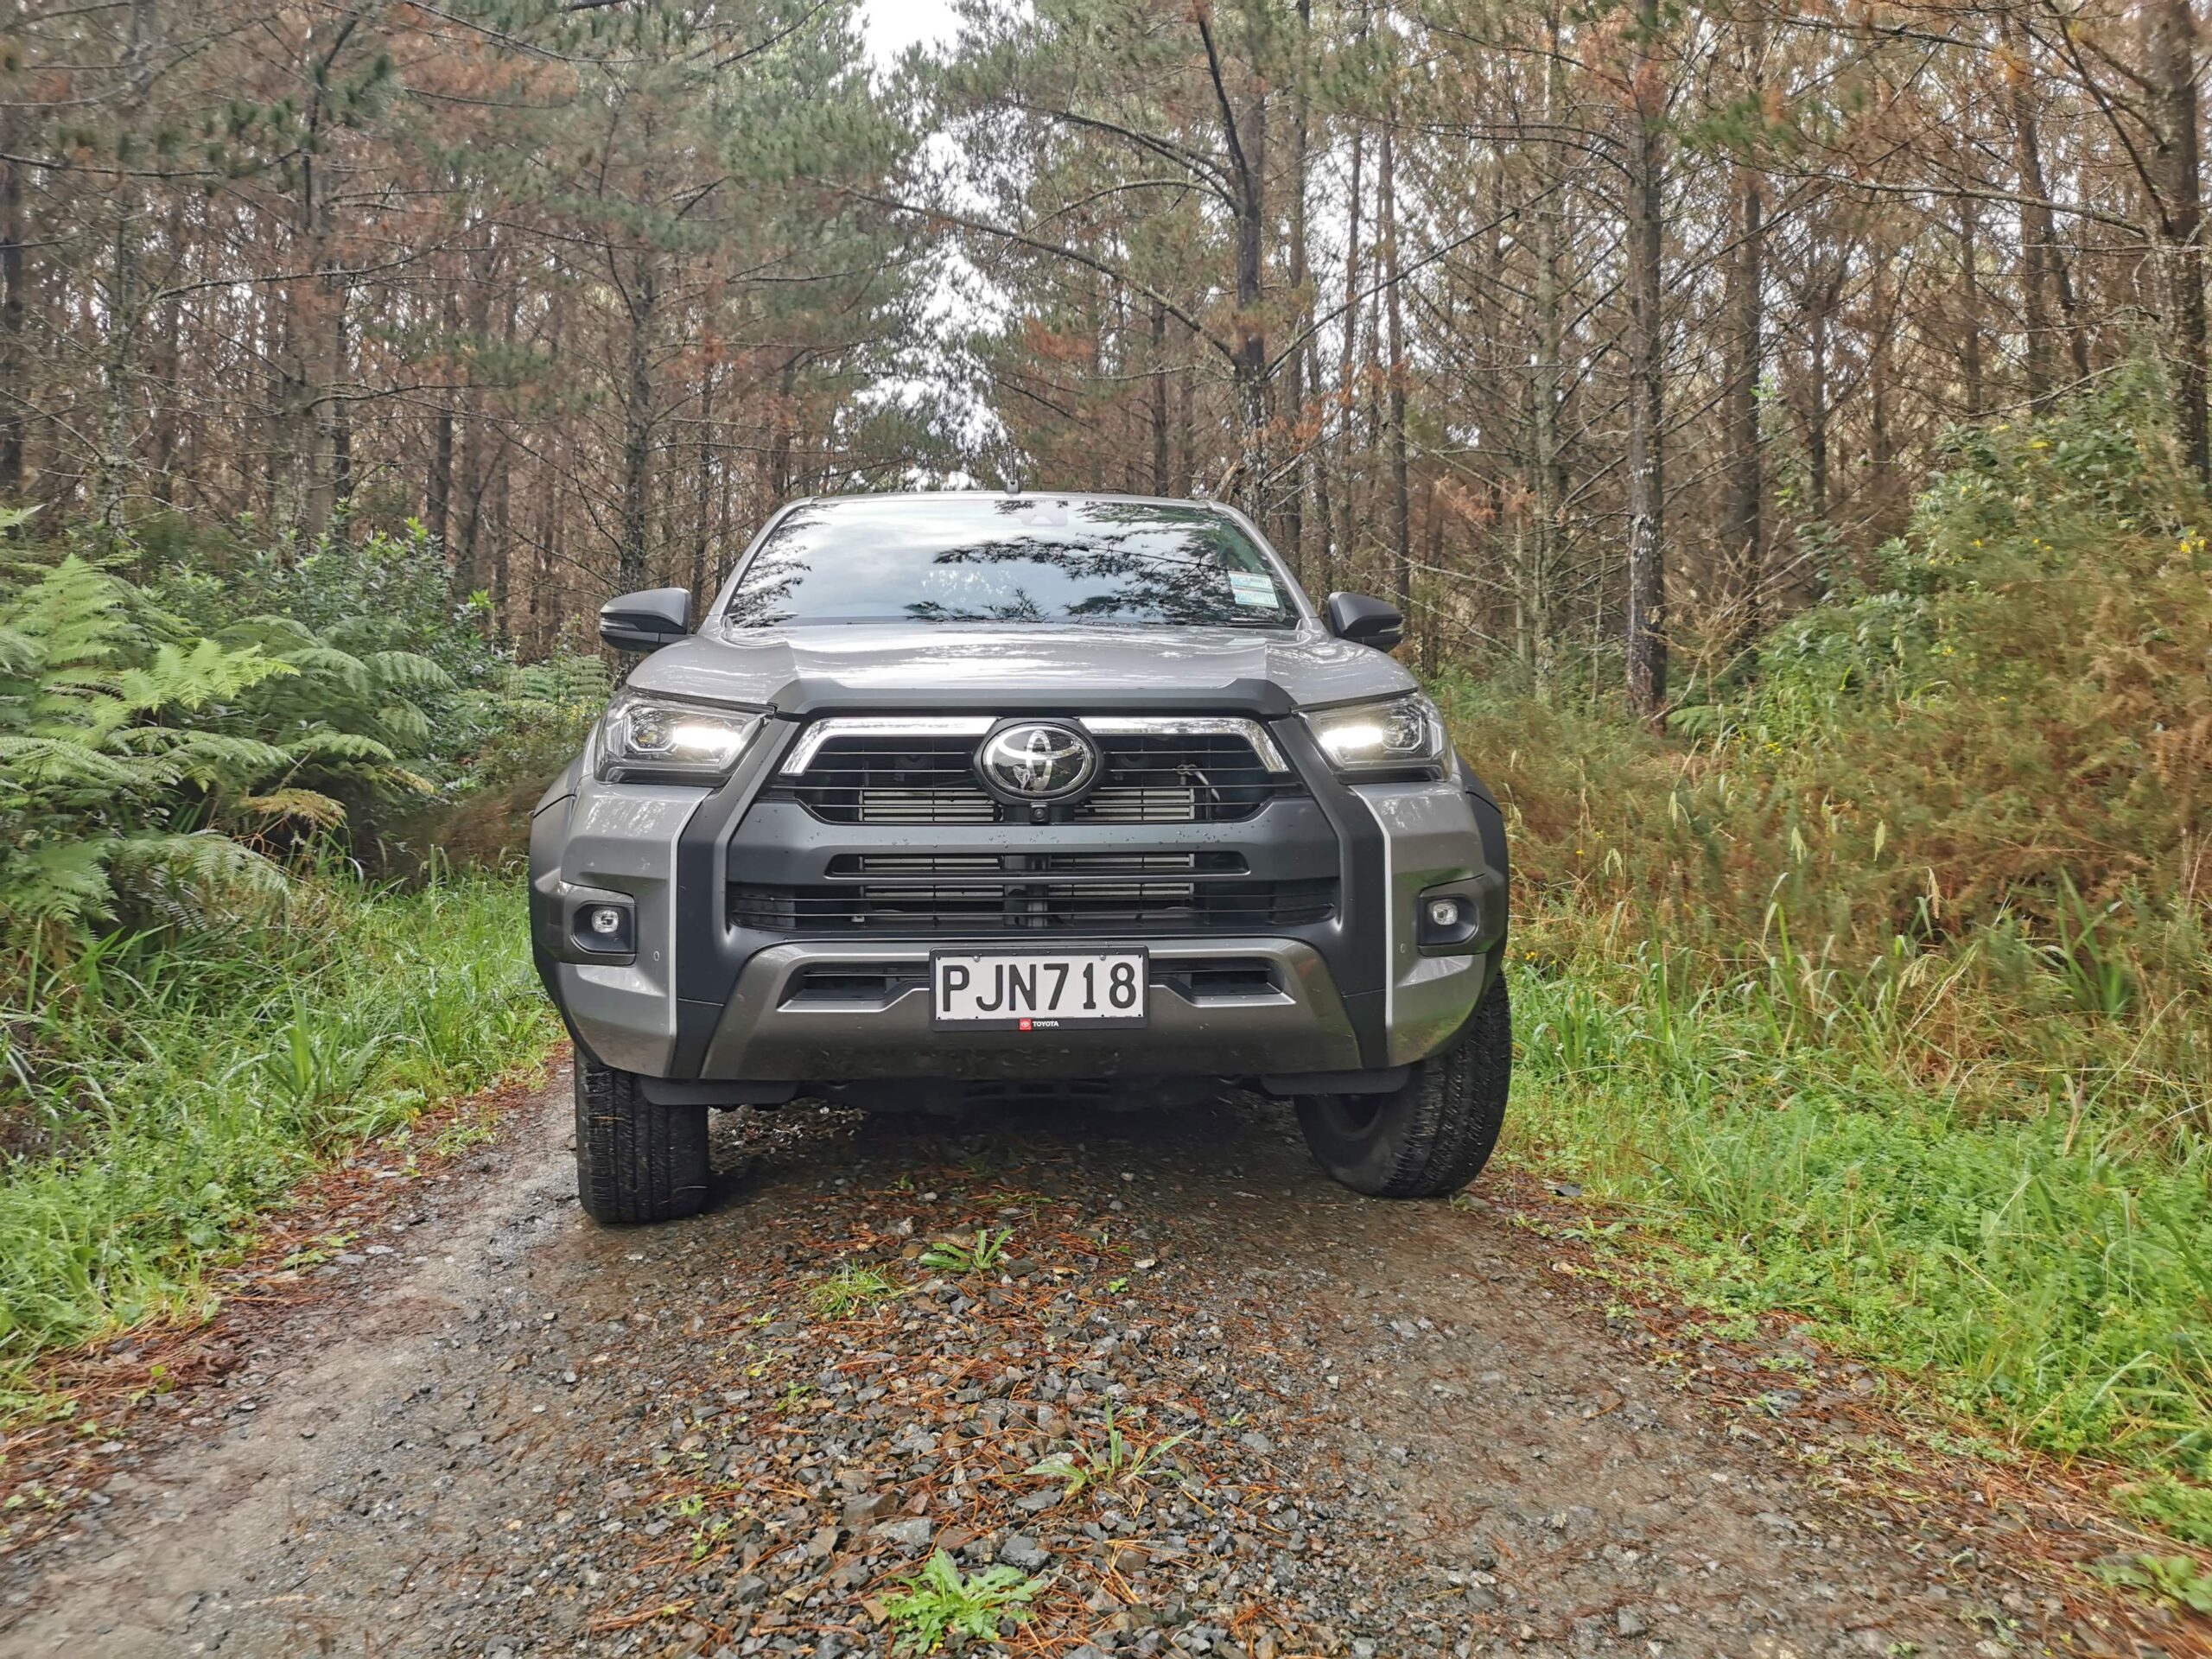 Toyota Hilux 4WD SR5 Cruiser Wide Track review NZ